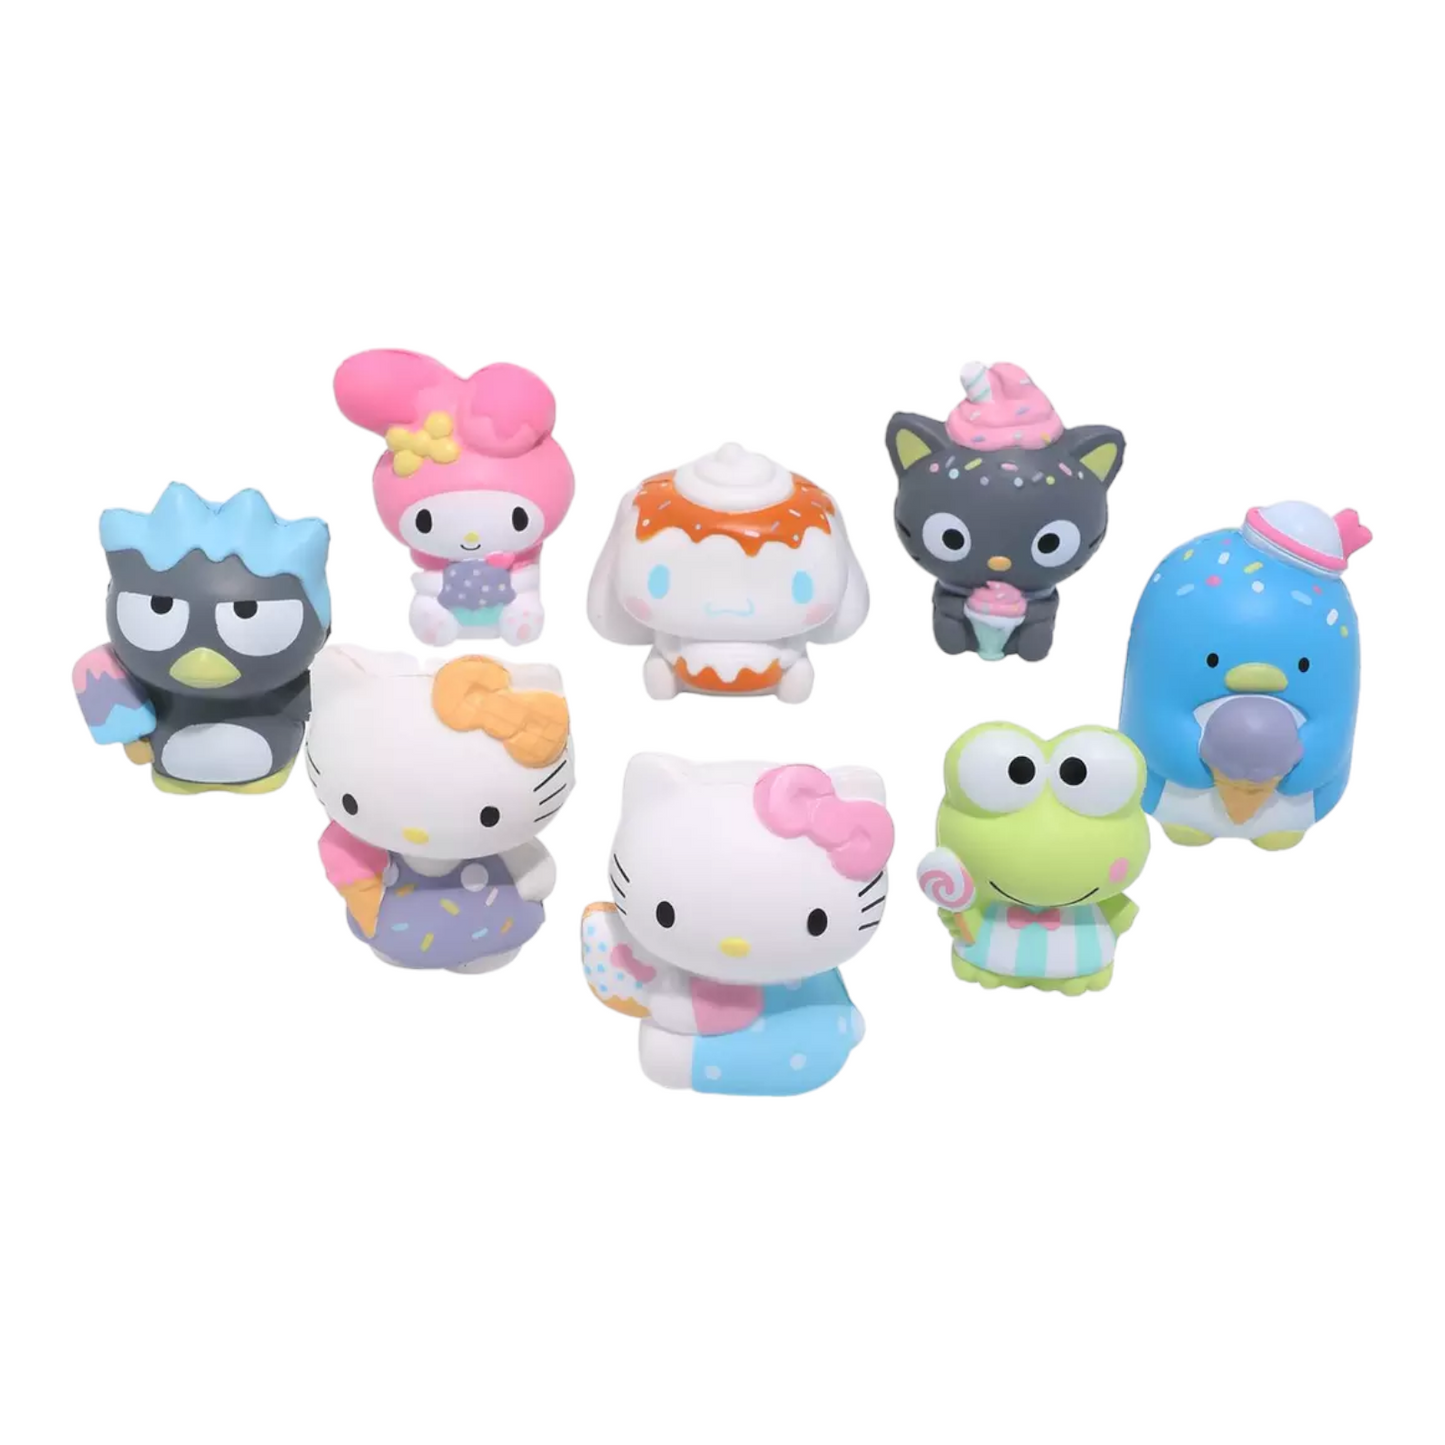 Squish'ums! Hello Kitty And Friends Series 2 Blind Box Squishies